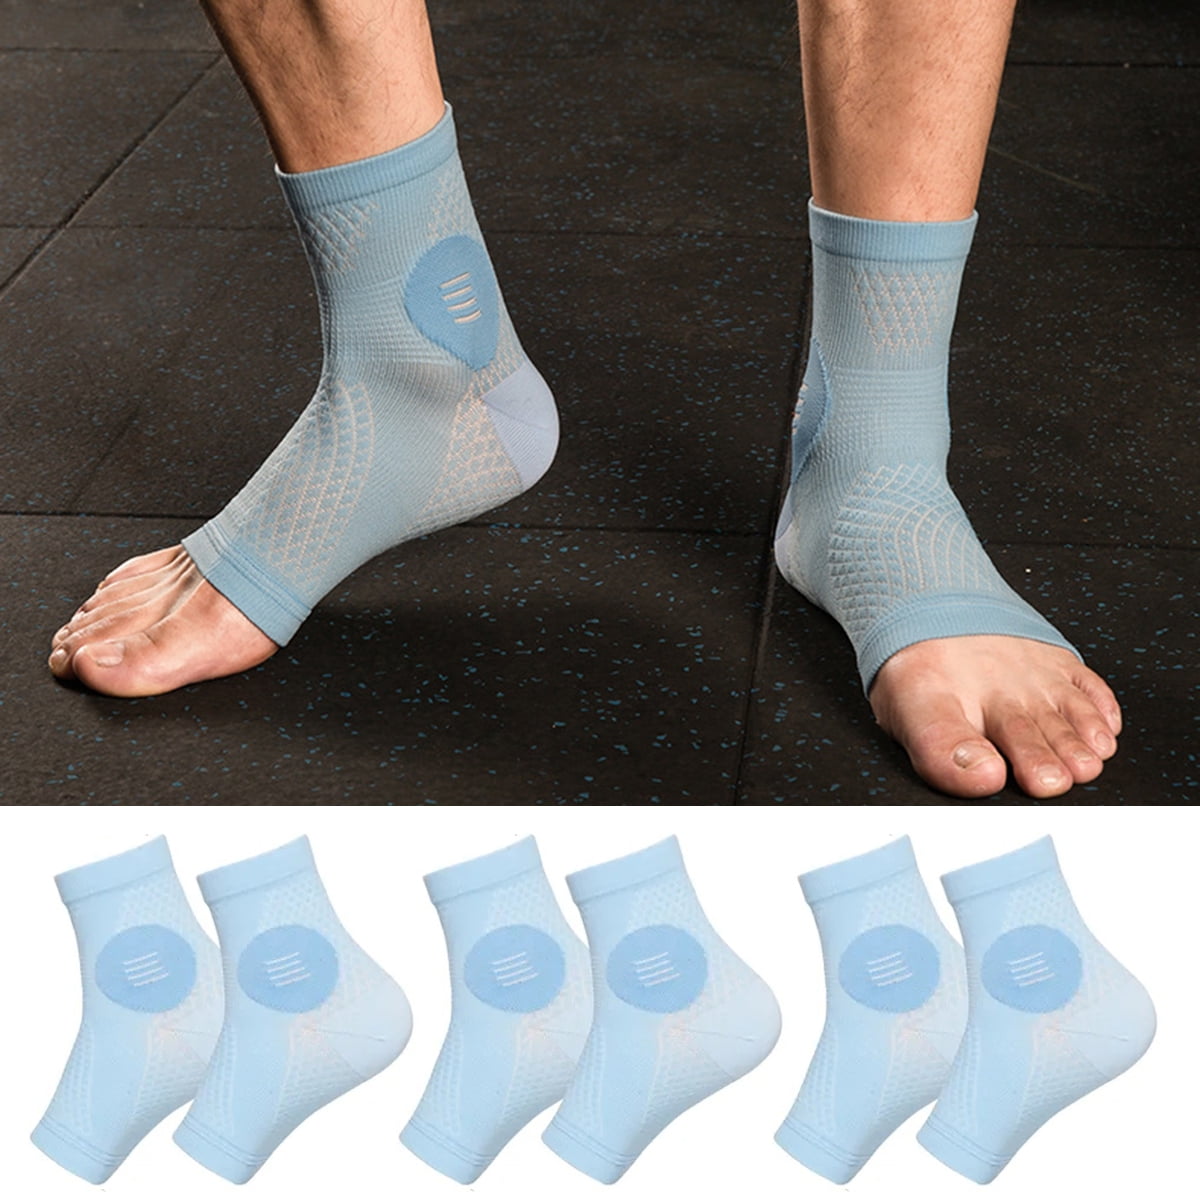 ZZRSYJ 2 Pairs Neuropathy Socks,chaussettes de compression